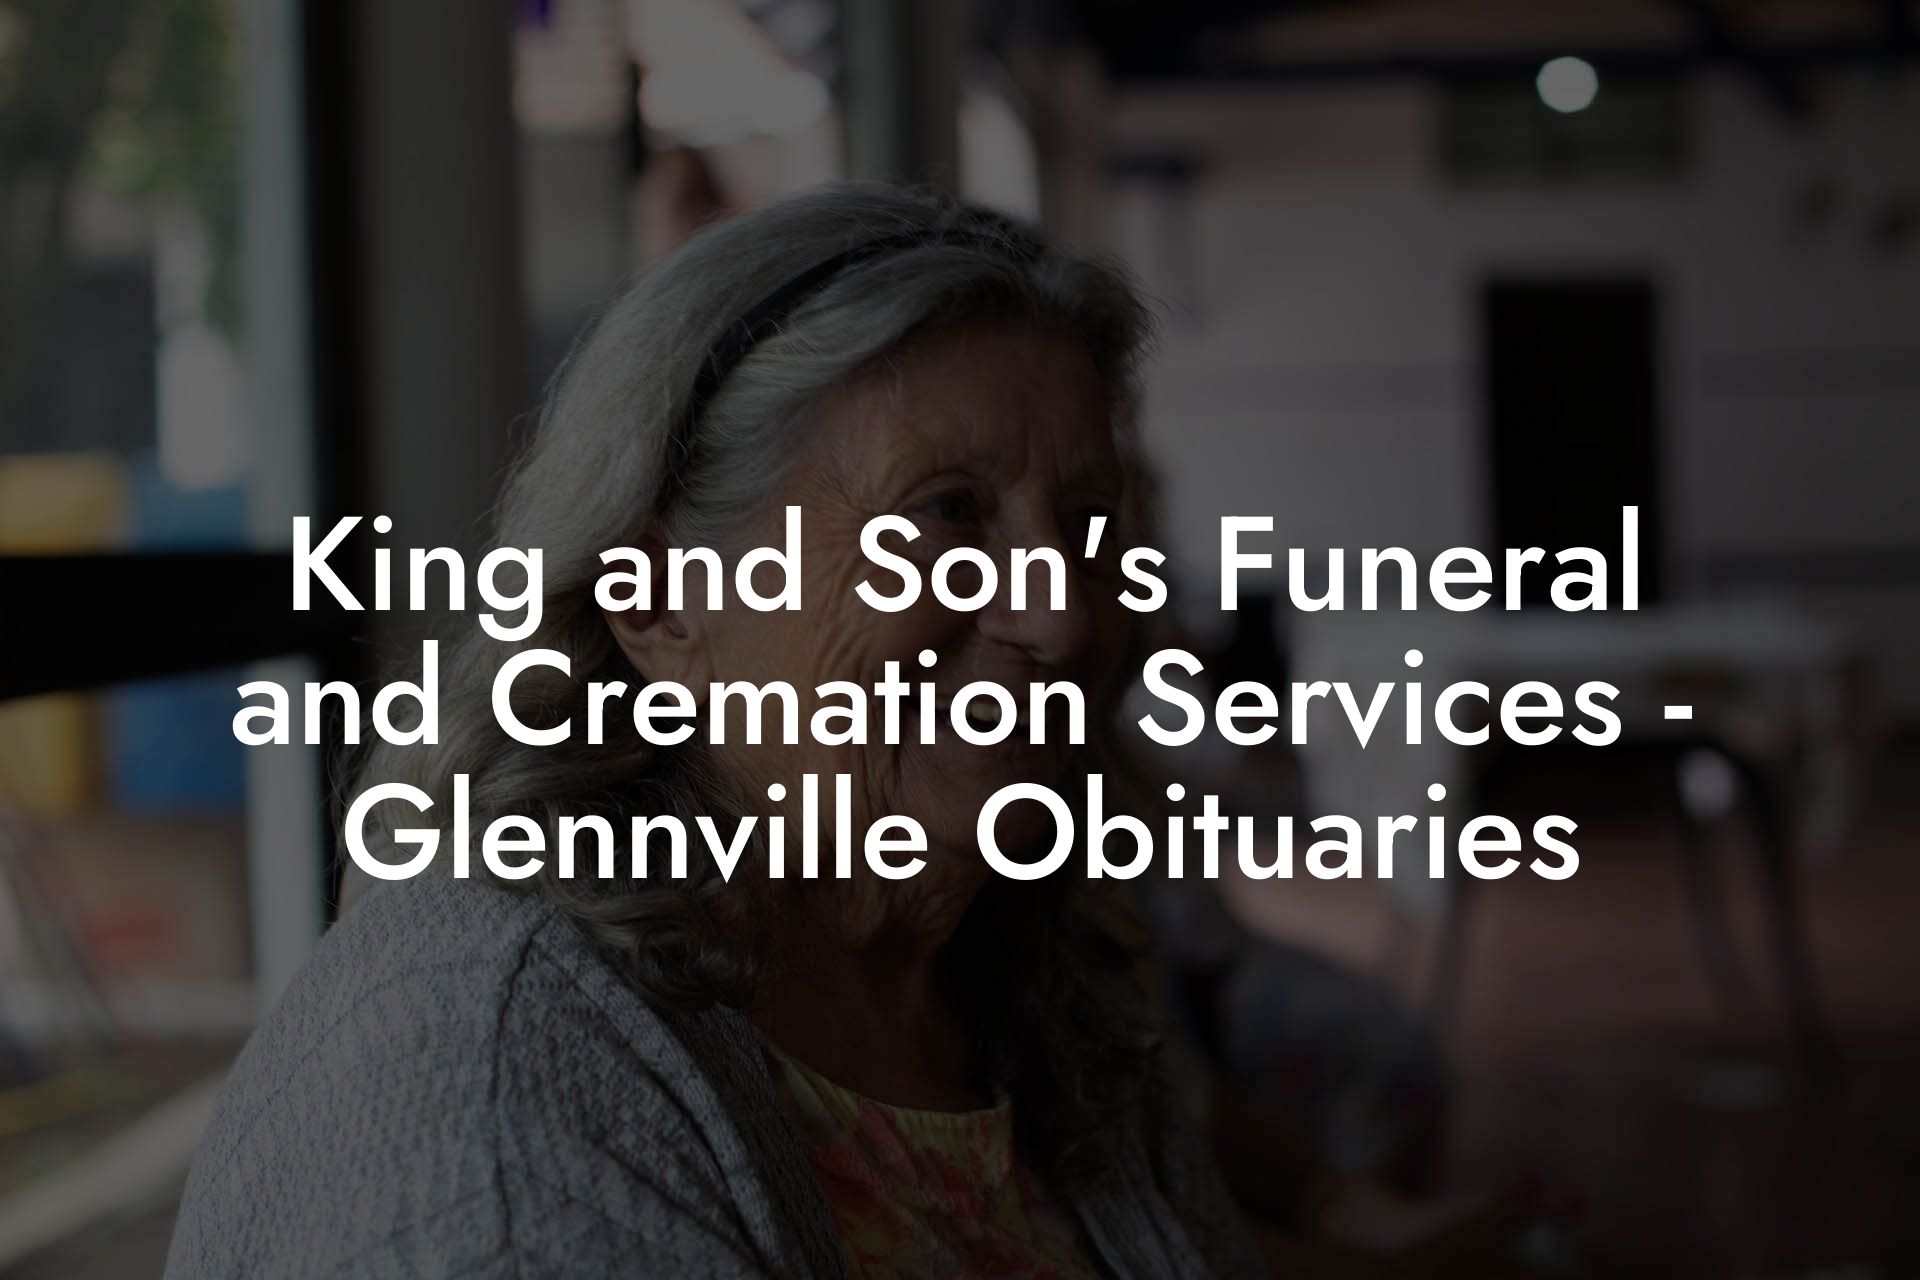 King and Son's Funeral and Cremation Services - Glennville Obituaries